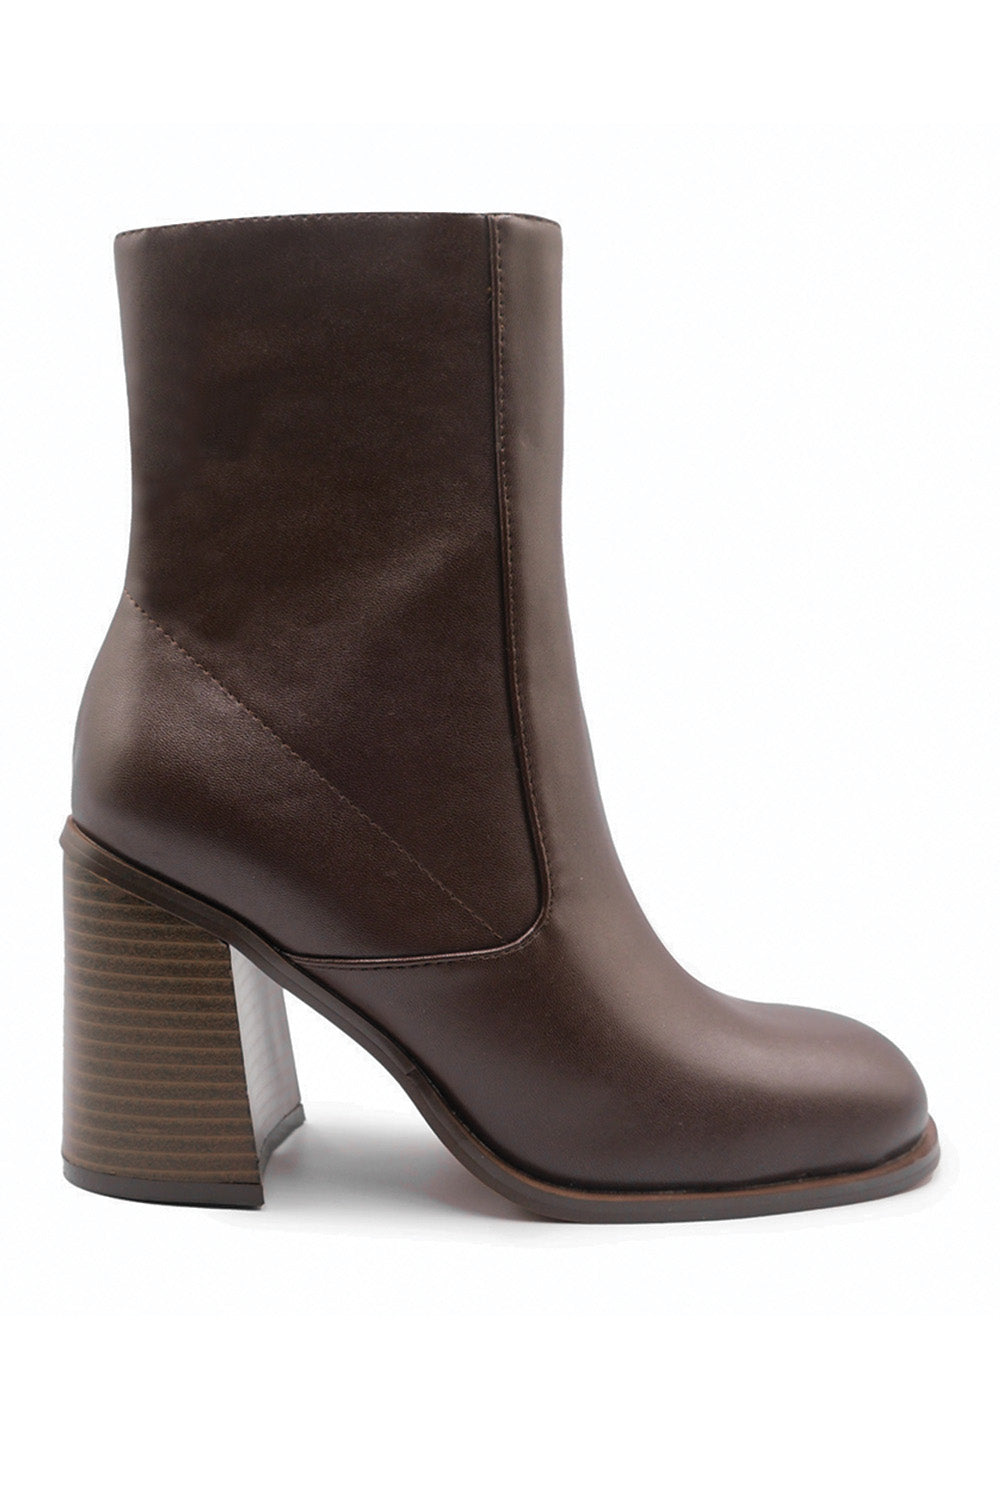 KEISHA BLOCK HEEL MID CALF BOOTS WITH SIDE ZIP IN BROWN FAUX LEATHER